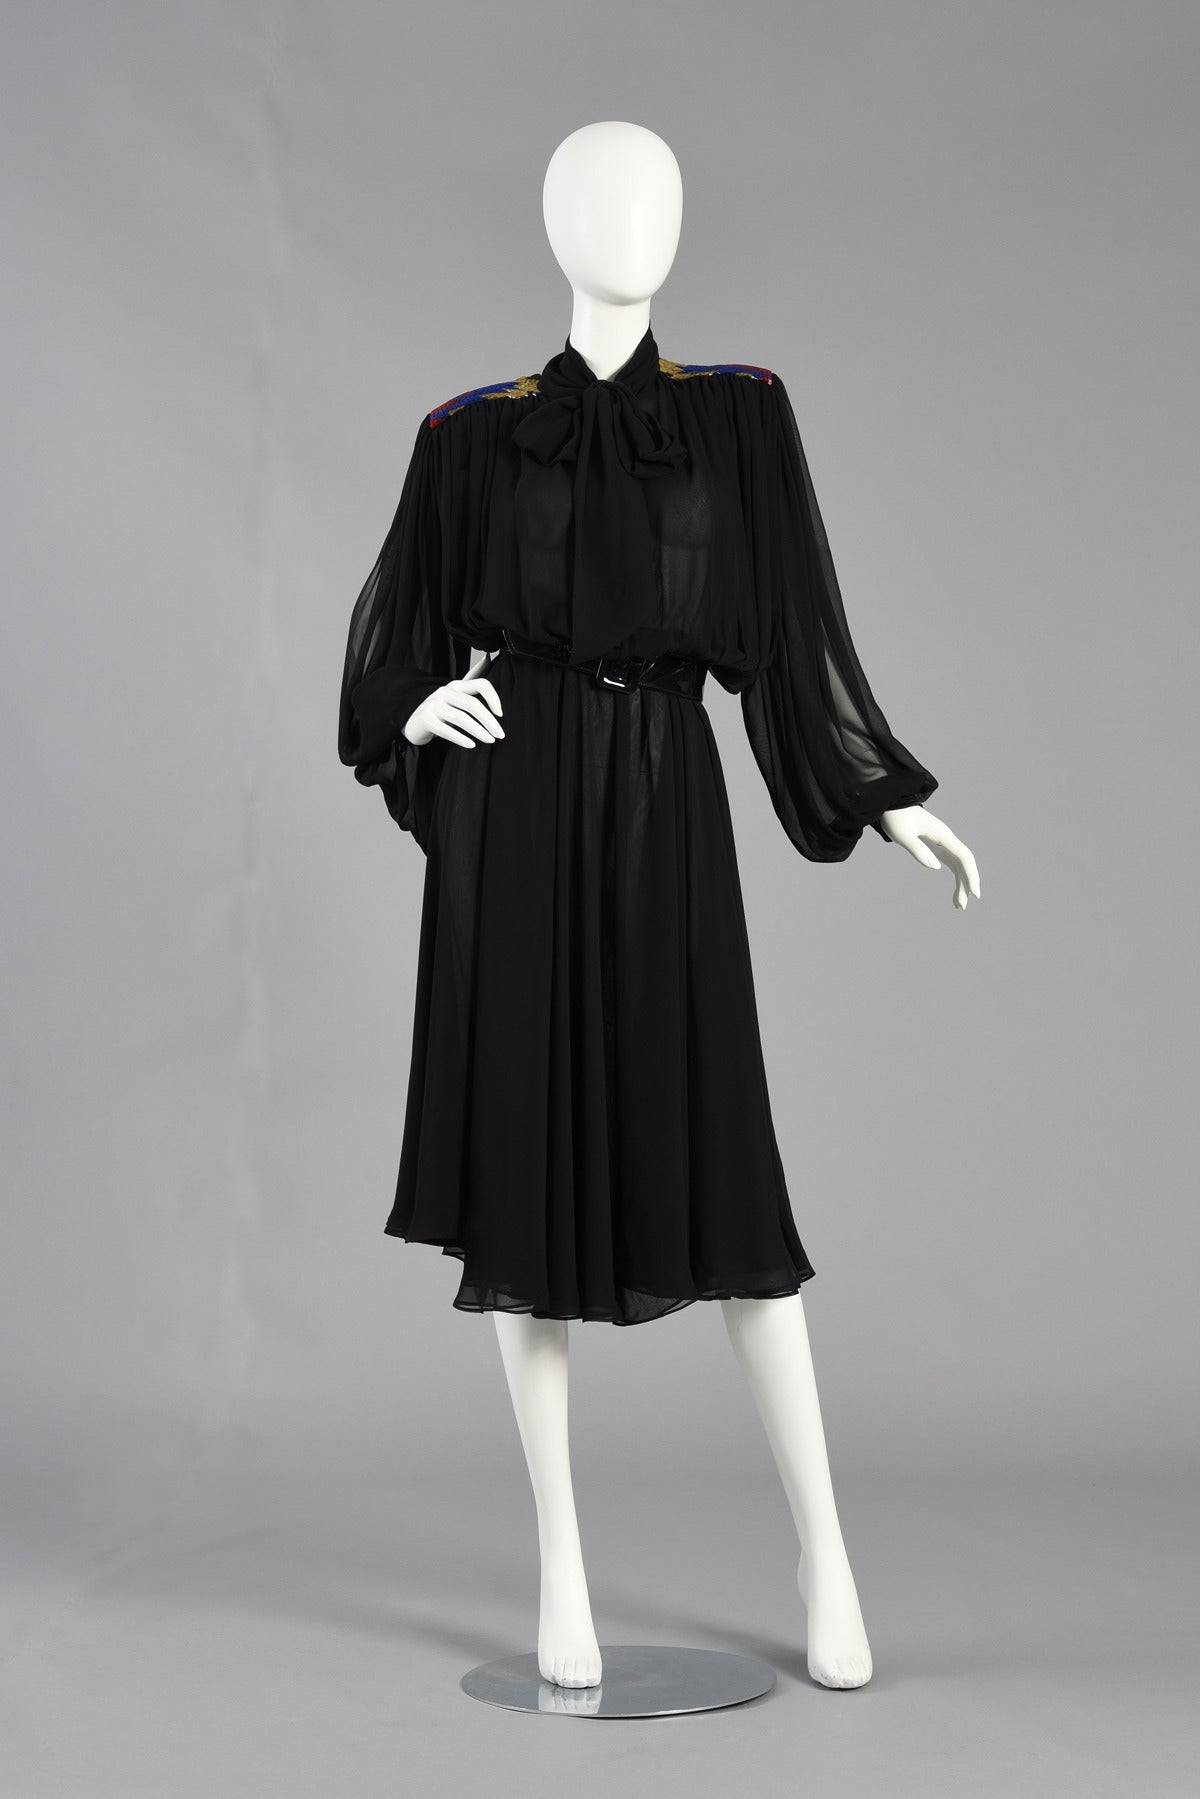 Bustown Modern is so happy to present this gorgeous 1980's black silk chiffon dress by Wayne Clark. Truly a stunning piece on with the most beautiful construction. Layered chiffon skirt with elastic waist, jeweled button up front and attached long